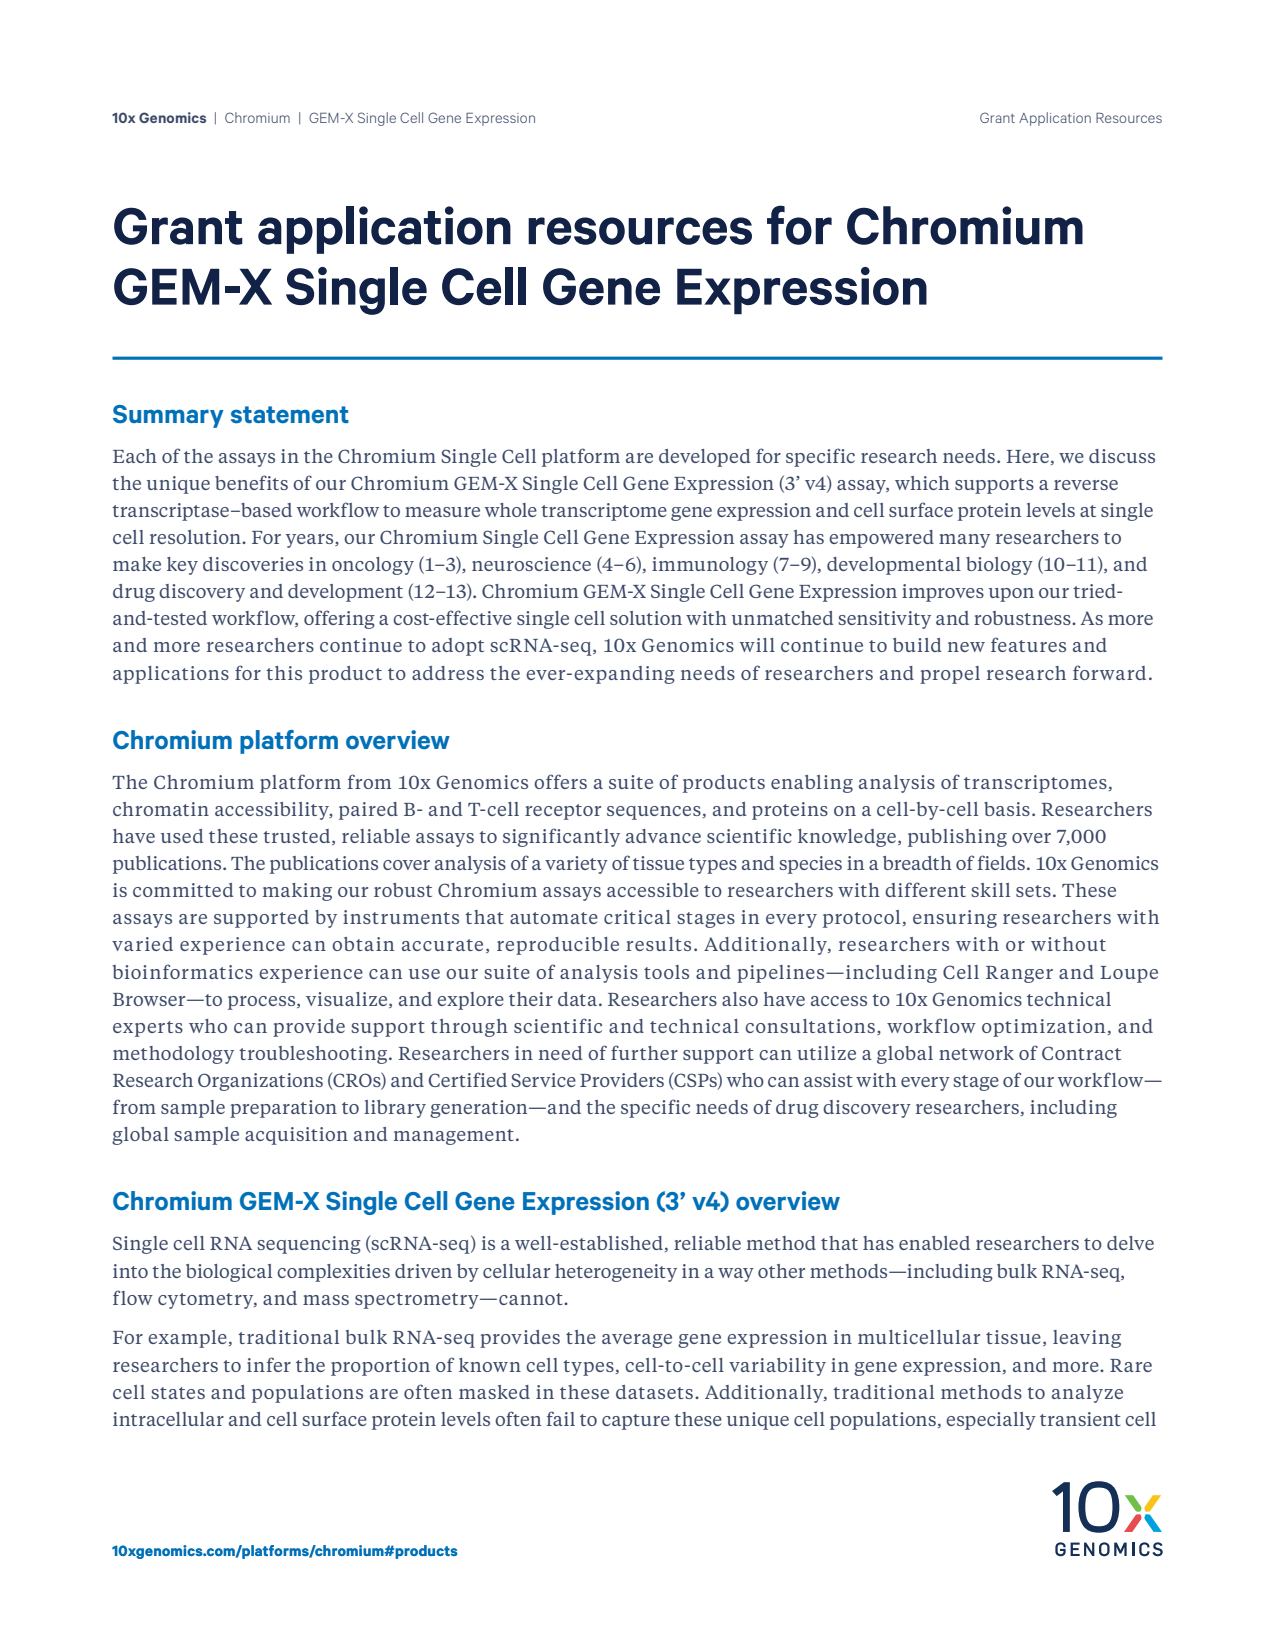 Grant application resources for Chromium GEM-X Single Cell Gene Expression